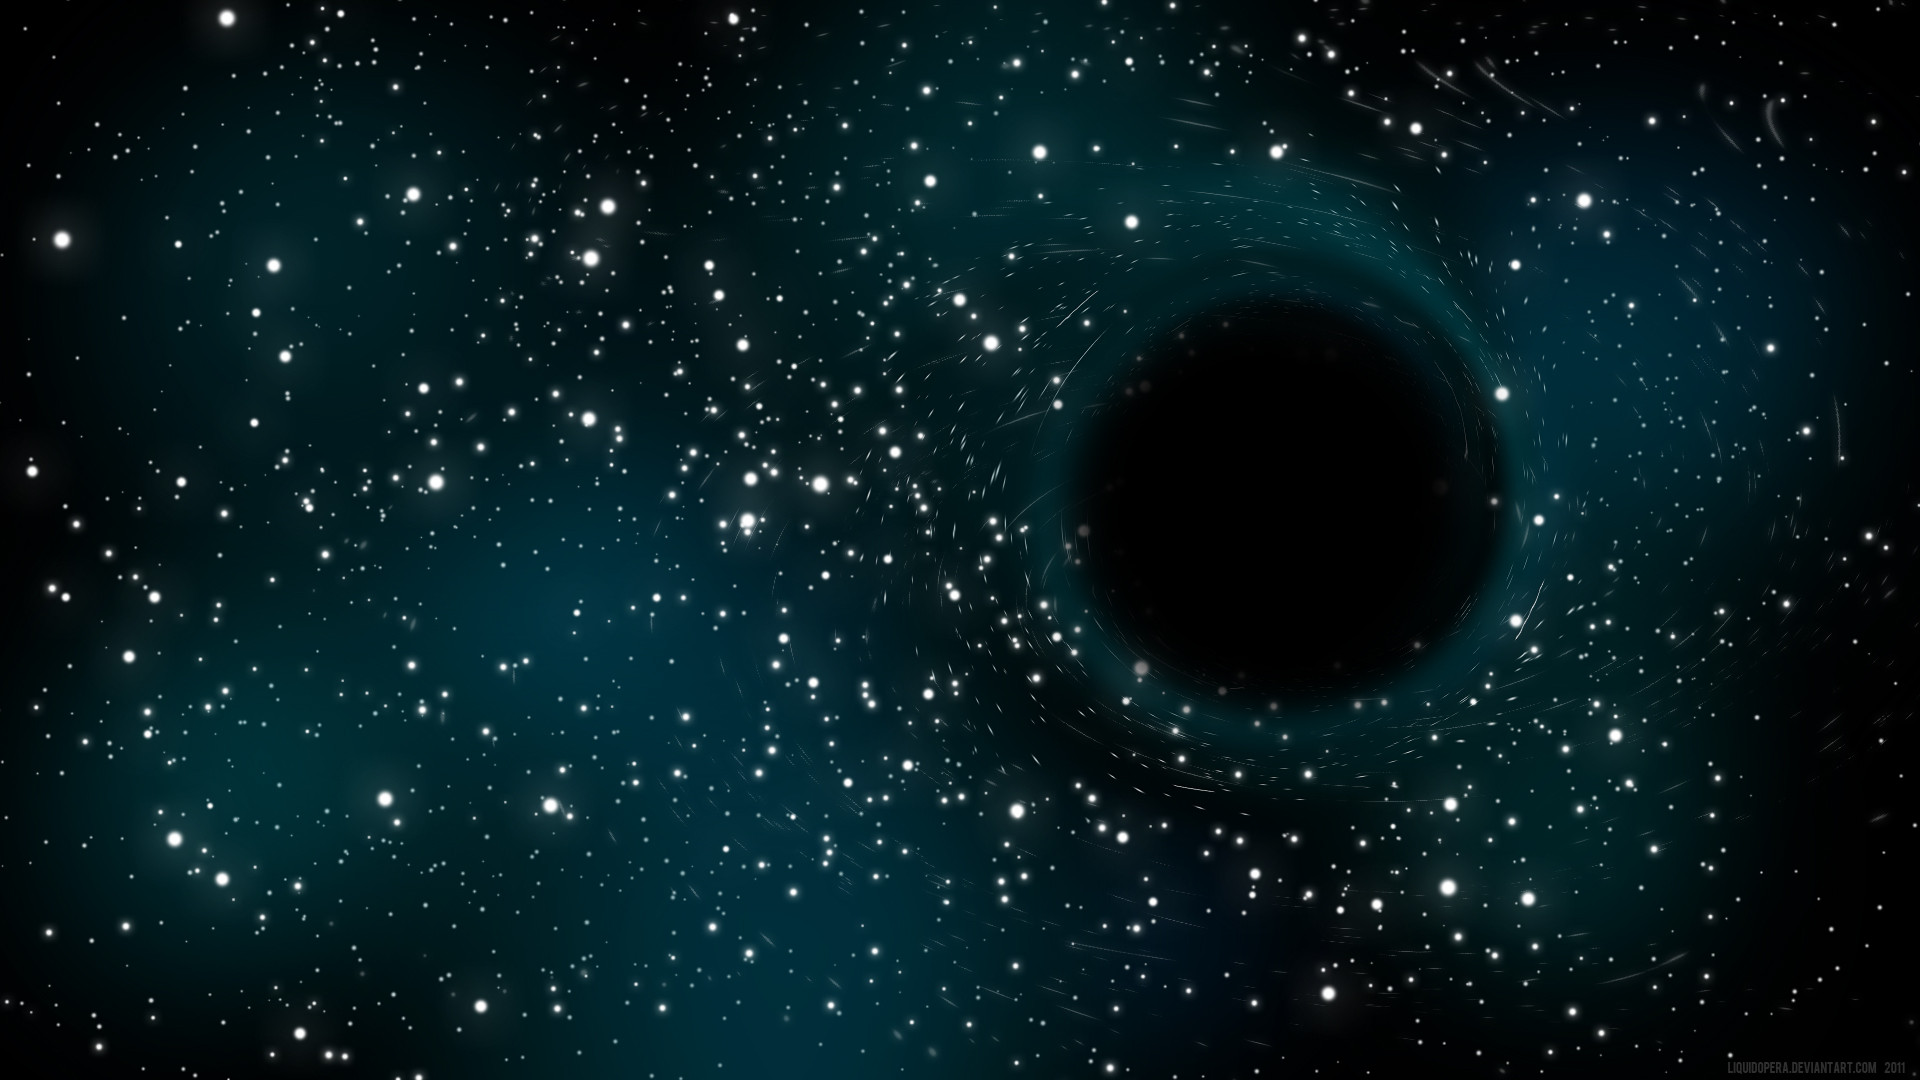 Supermassive Black Hole Wallpaper 25247 Hd Wallpapers in Space